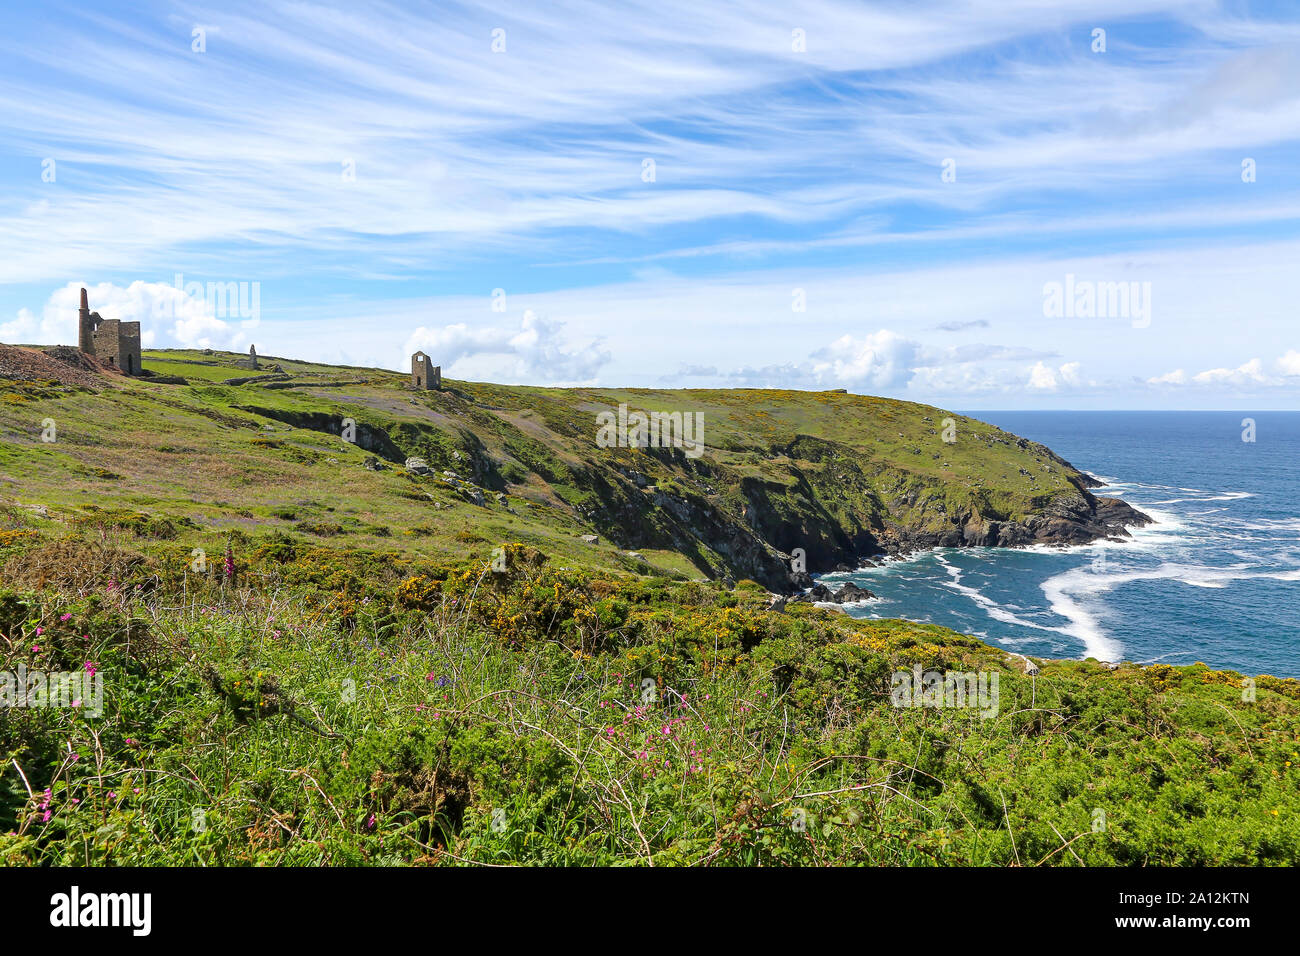 Looking towards the disused mine workings at Botallack, Cornwall, England, UK Stock Photo